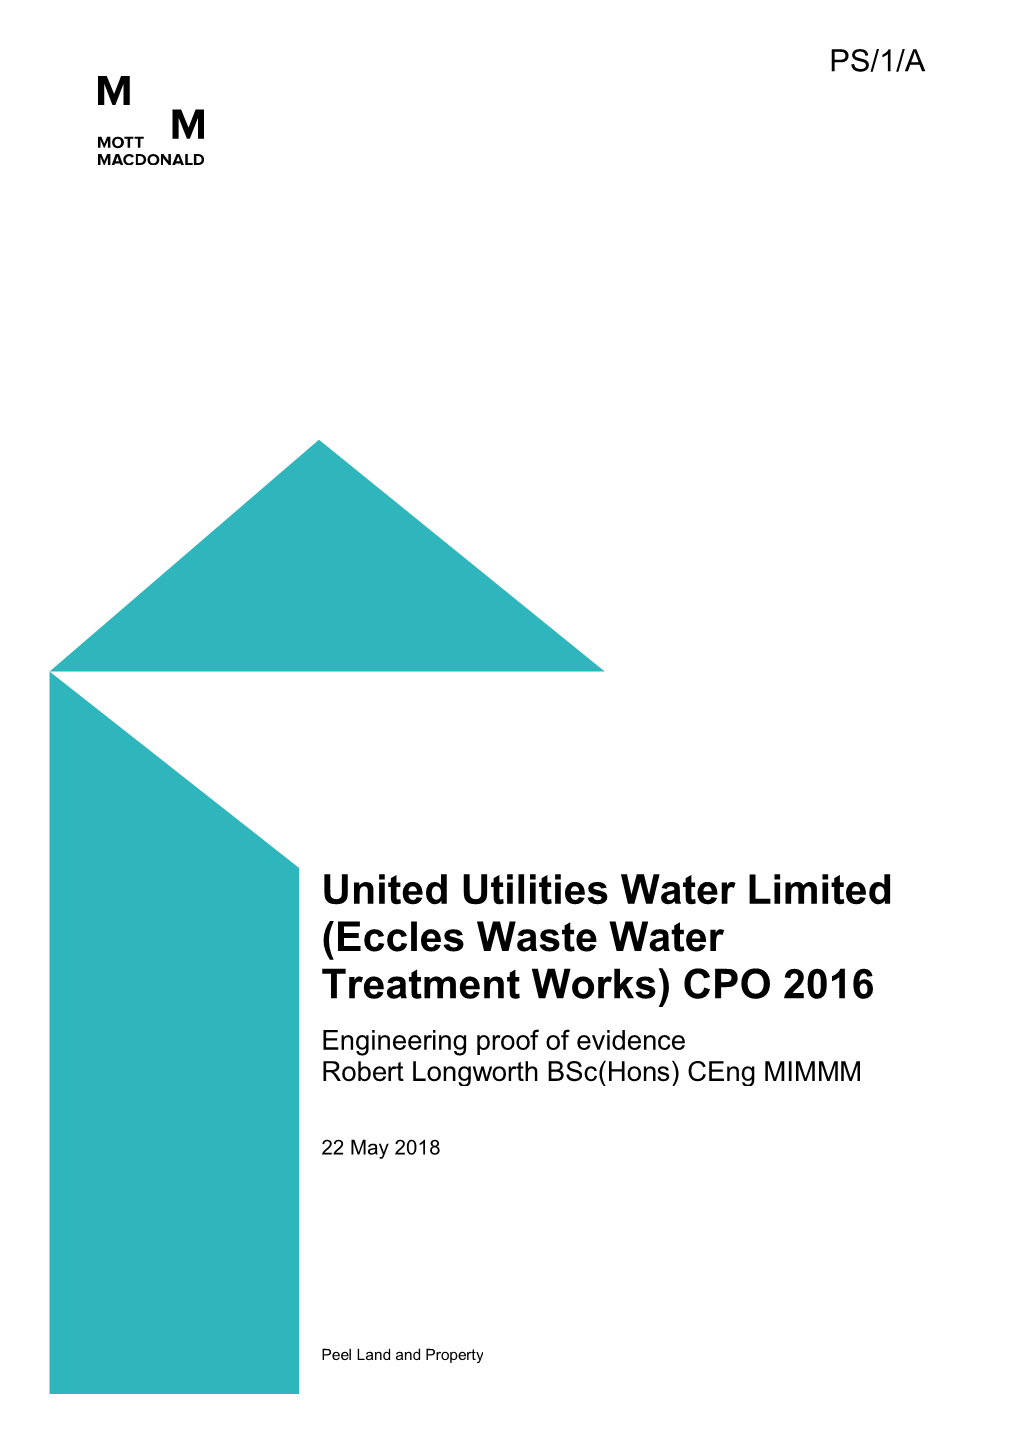 (Eccles Waste Water Treatment Works) CPO 2016 Engineering Proof of Evidence Robert Longworth Bsc(Hons) Ceng MIMMM